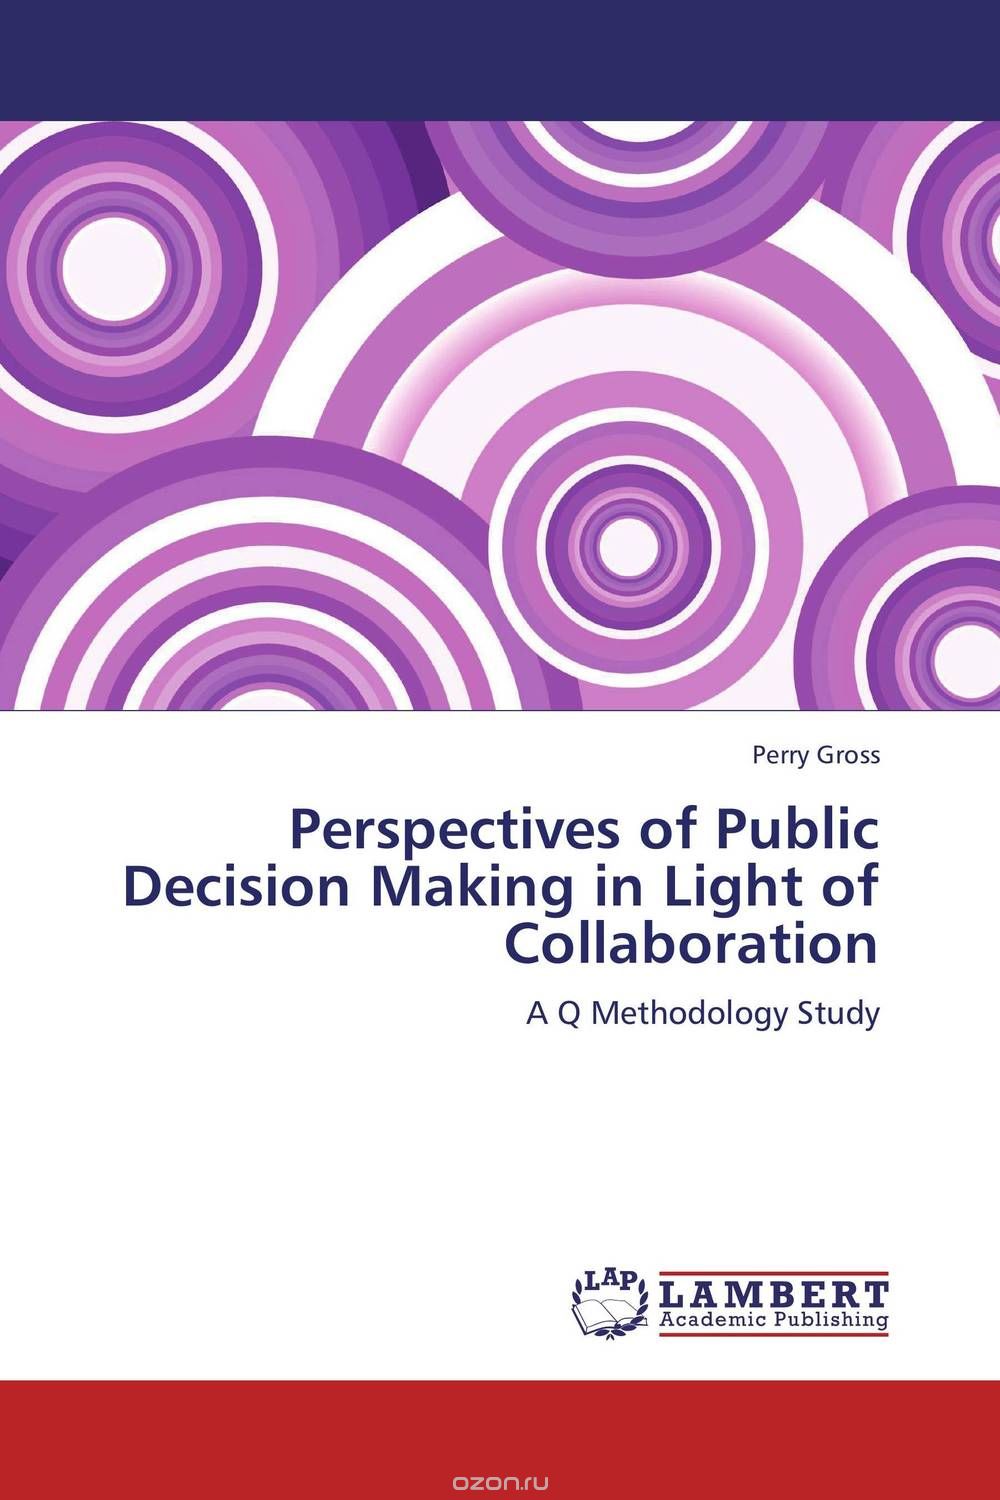 Скачать книгу "Perspectives of Public Decision Making in Light of Collaboration"